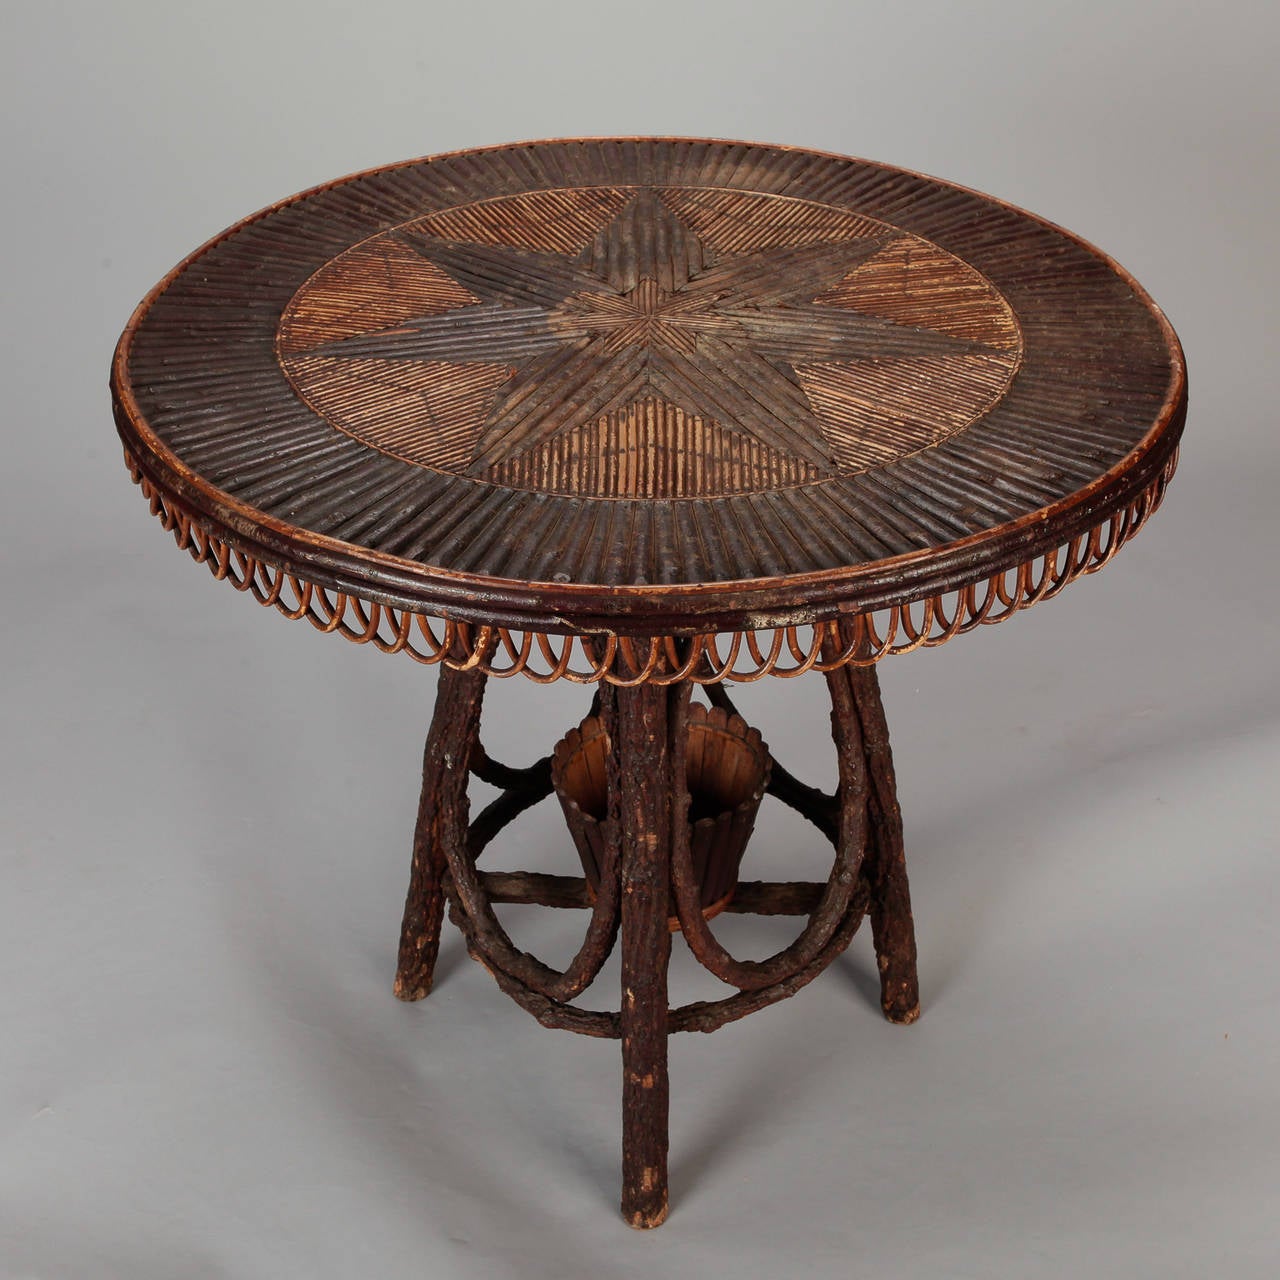 French Round Bent Willow Twig Table With Star Design Inlay At 1stdibs